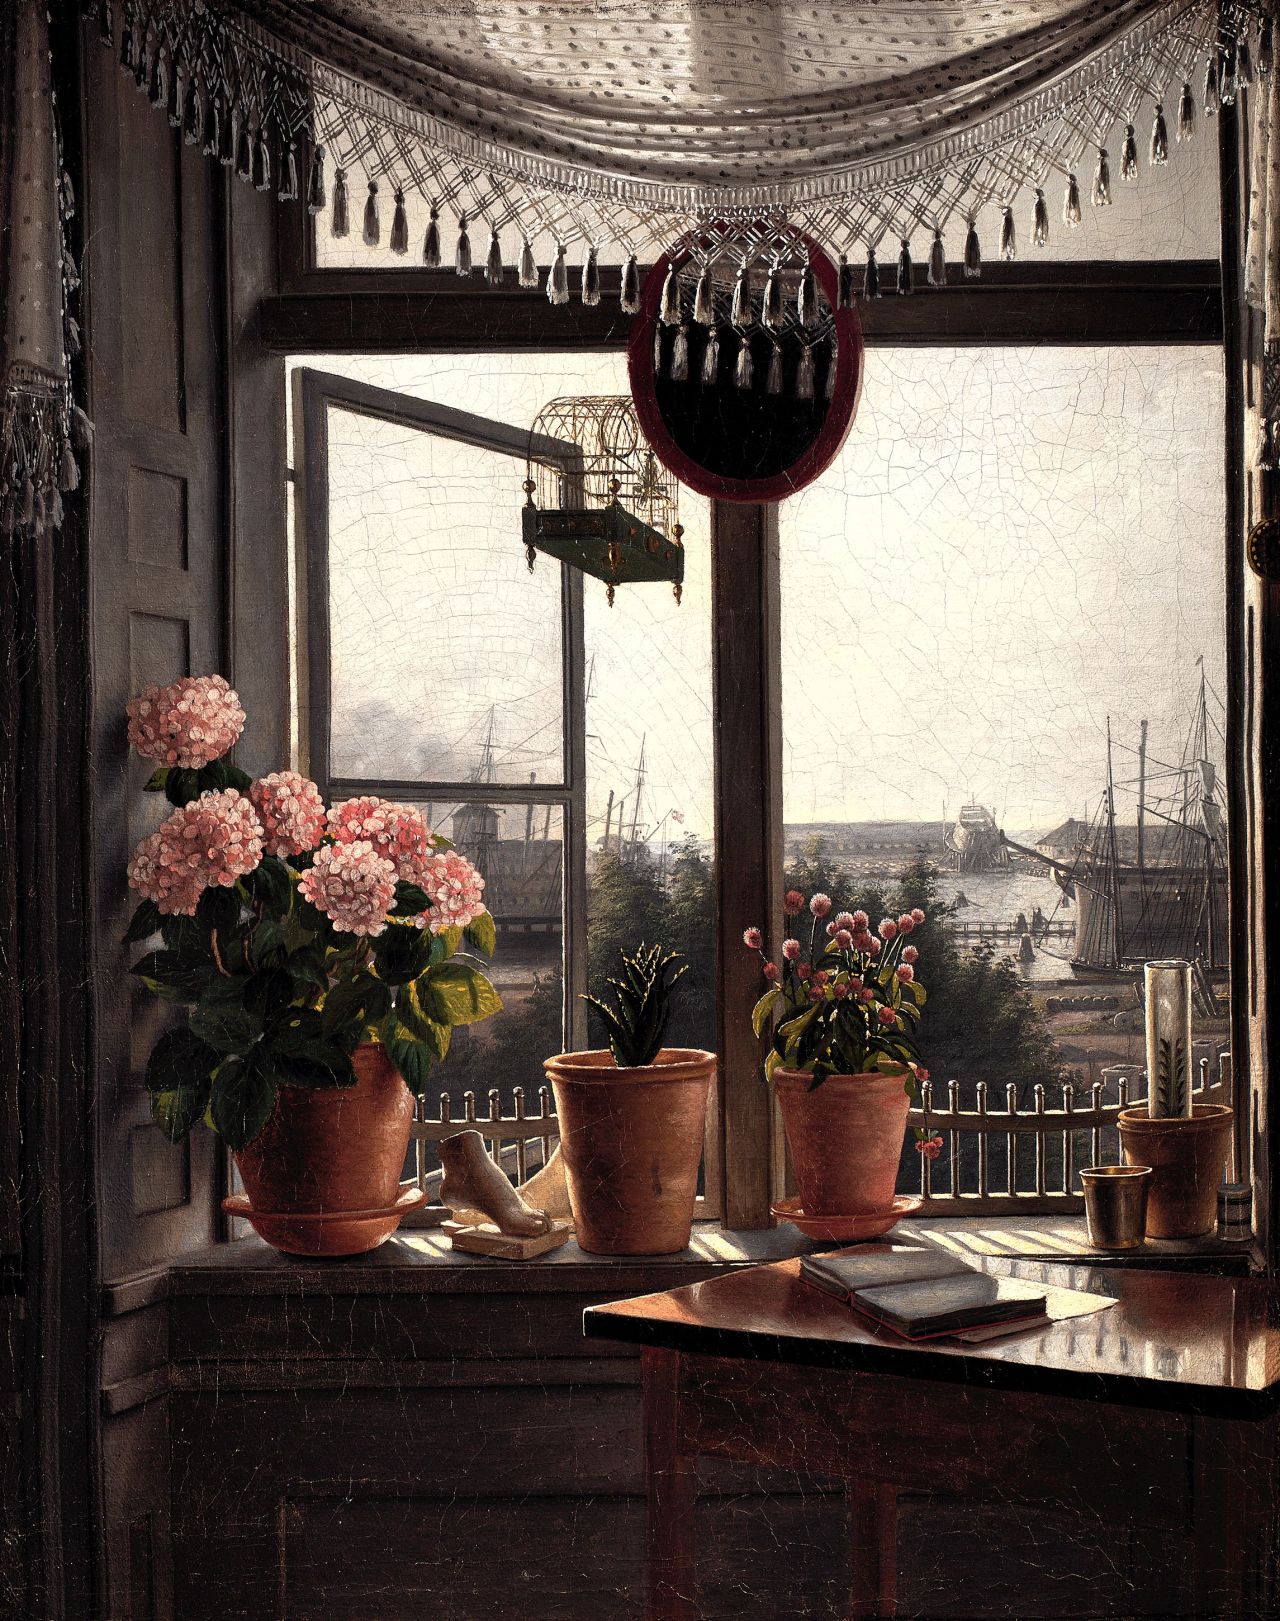 View From the Artist’s Window (1825), by Danish painter Martinus Rorbye. How gorgeous is this!
// ]]]]>]]> ]]>